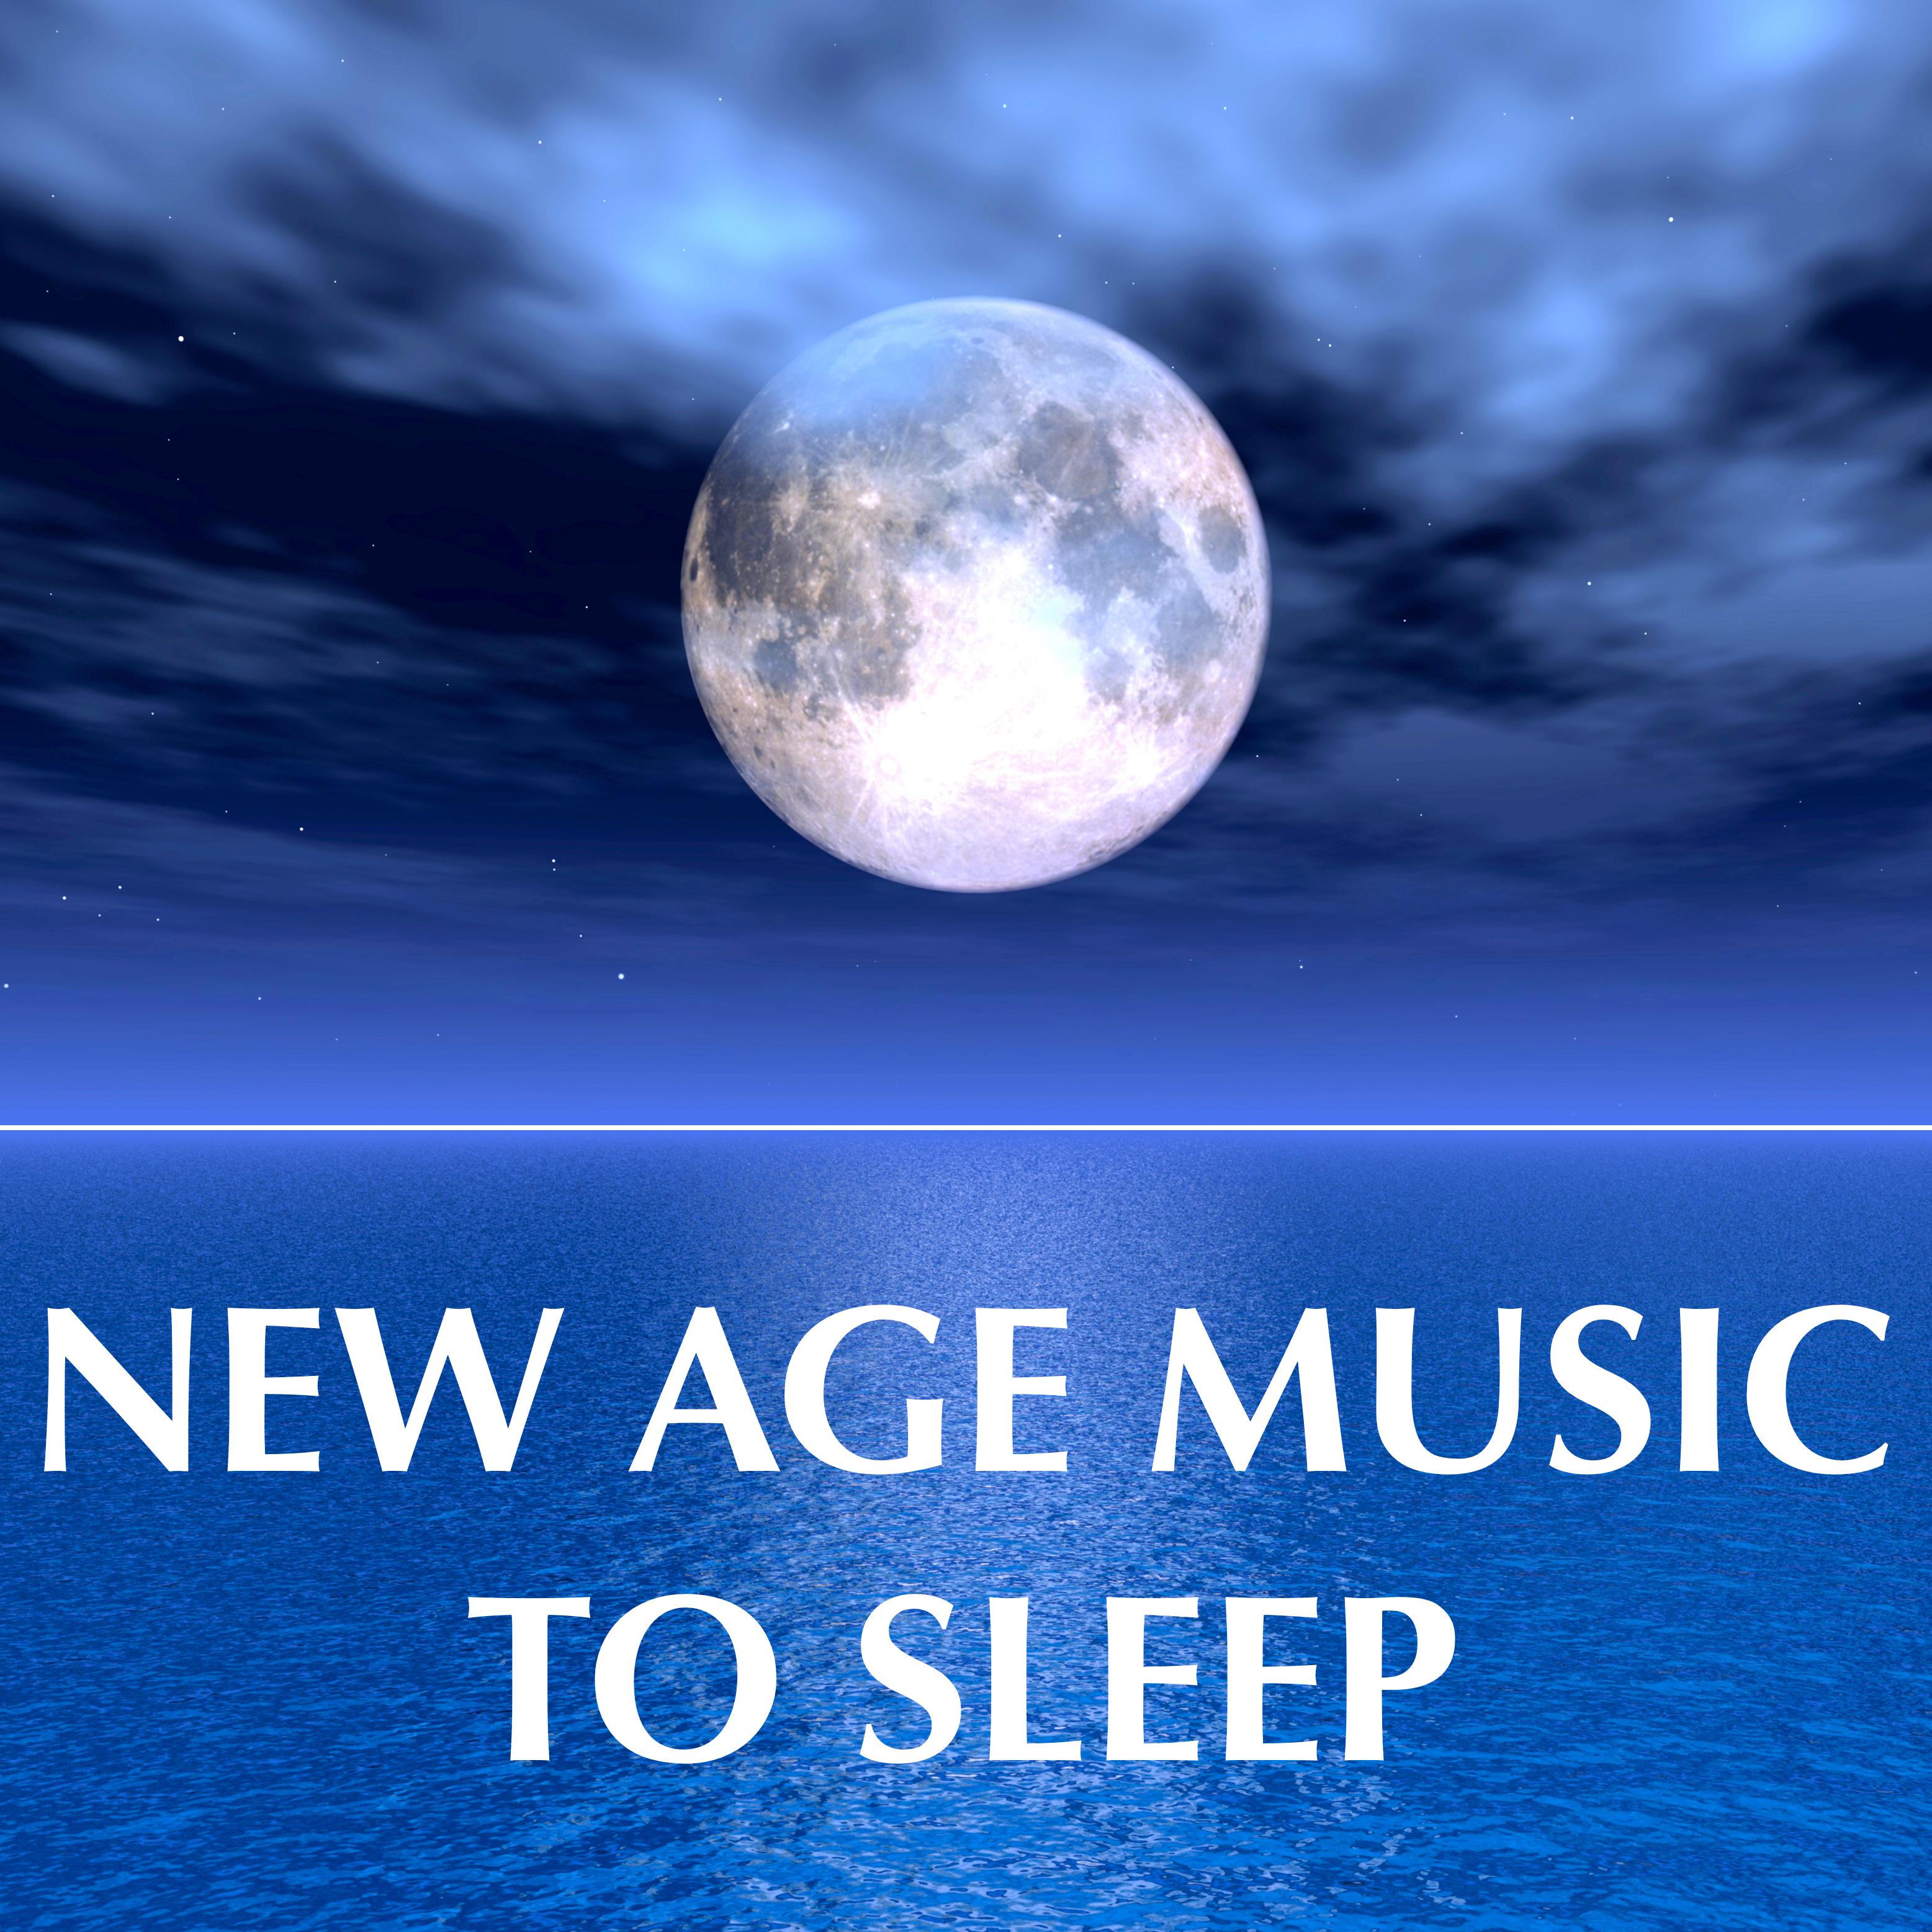 New Age Music to Sleep – Songs for Deep Relaxation after a Long Day to Help You Sleep